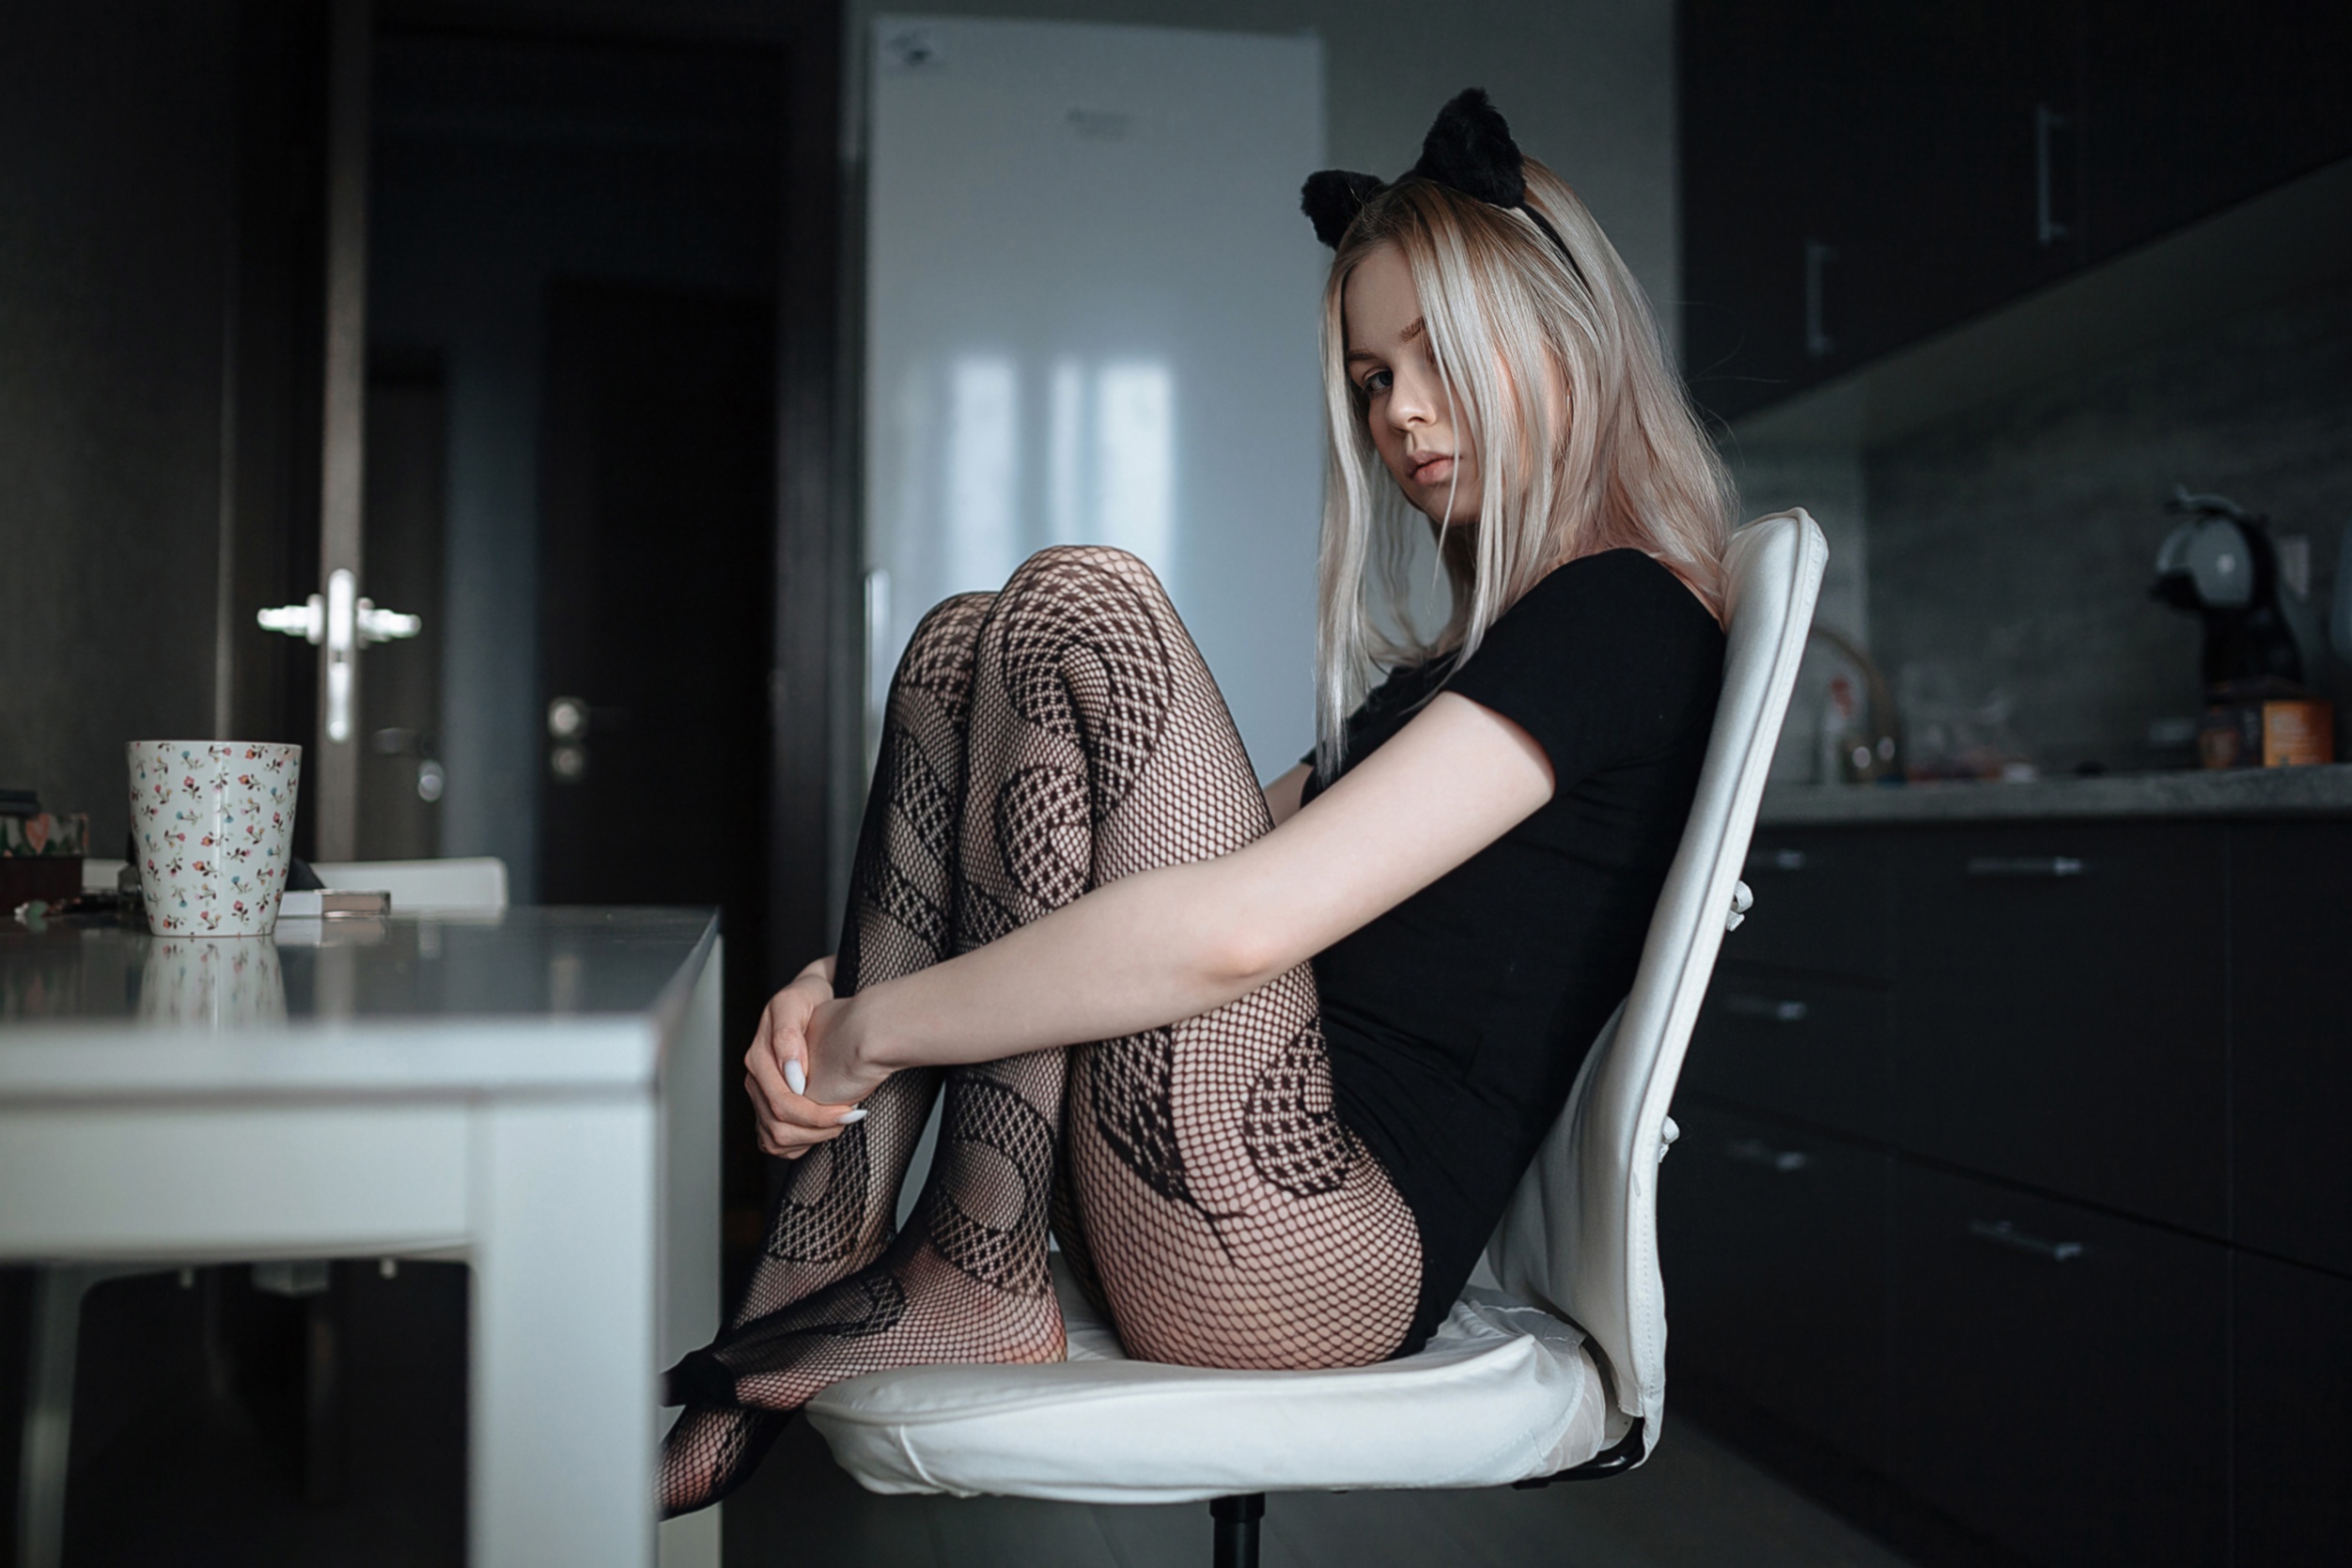 People 2503x1669 women model sitting chair looking at viewer indoors women indoors pantyhose blonde legs together kitchen pointed toes fishnet fishnet pantyhose legs